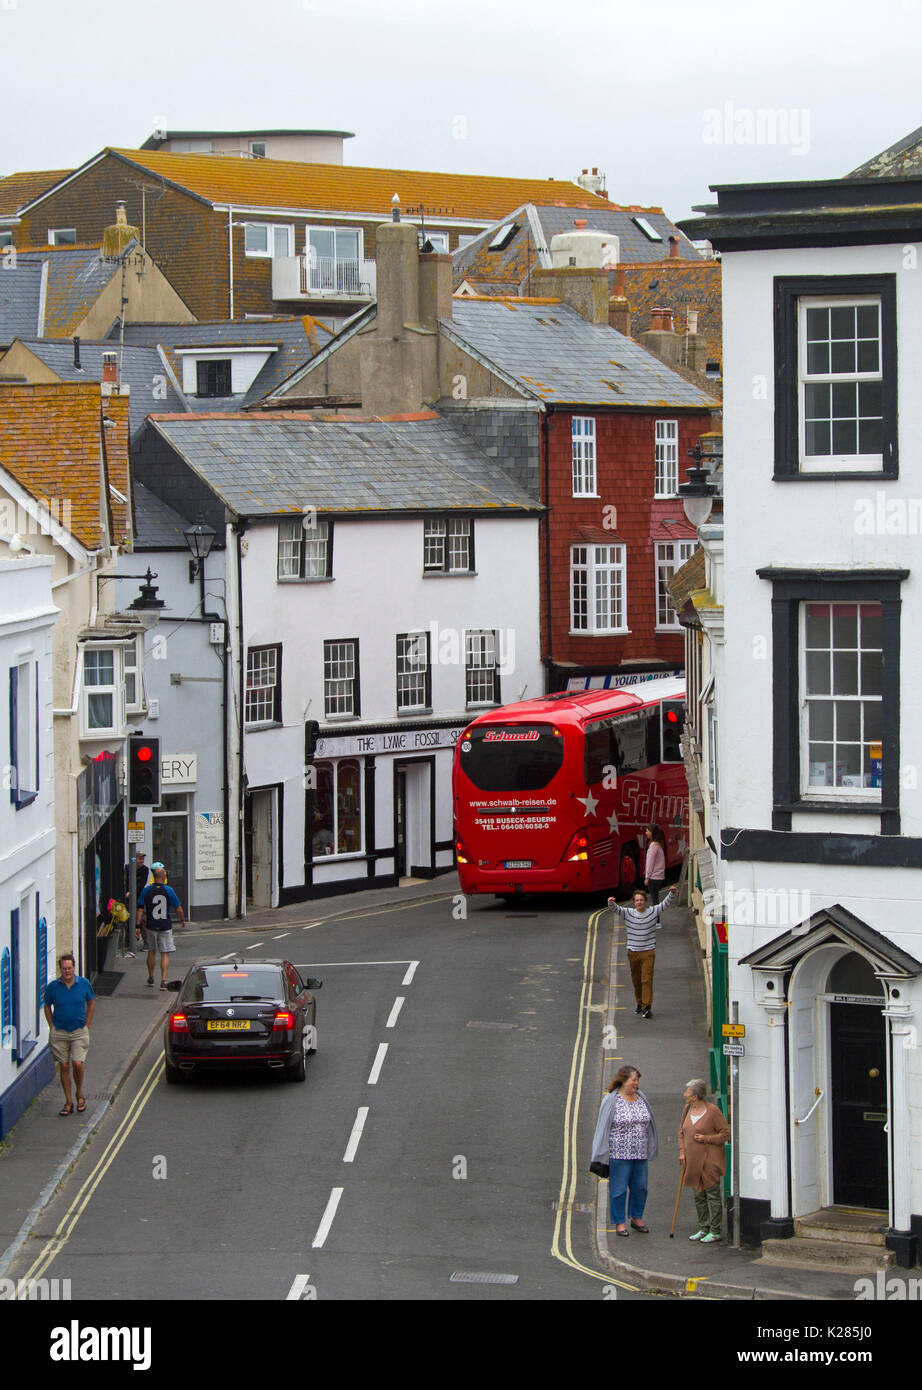 Tourist coach, car, and pedestrians in narrow street among tall buildings  in Lyme Regis, West Dorset, England Stock Photo